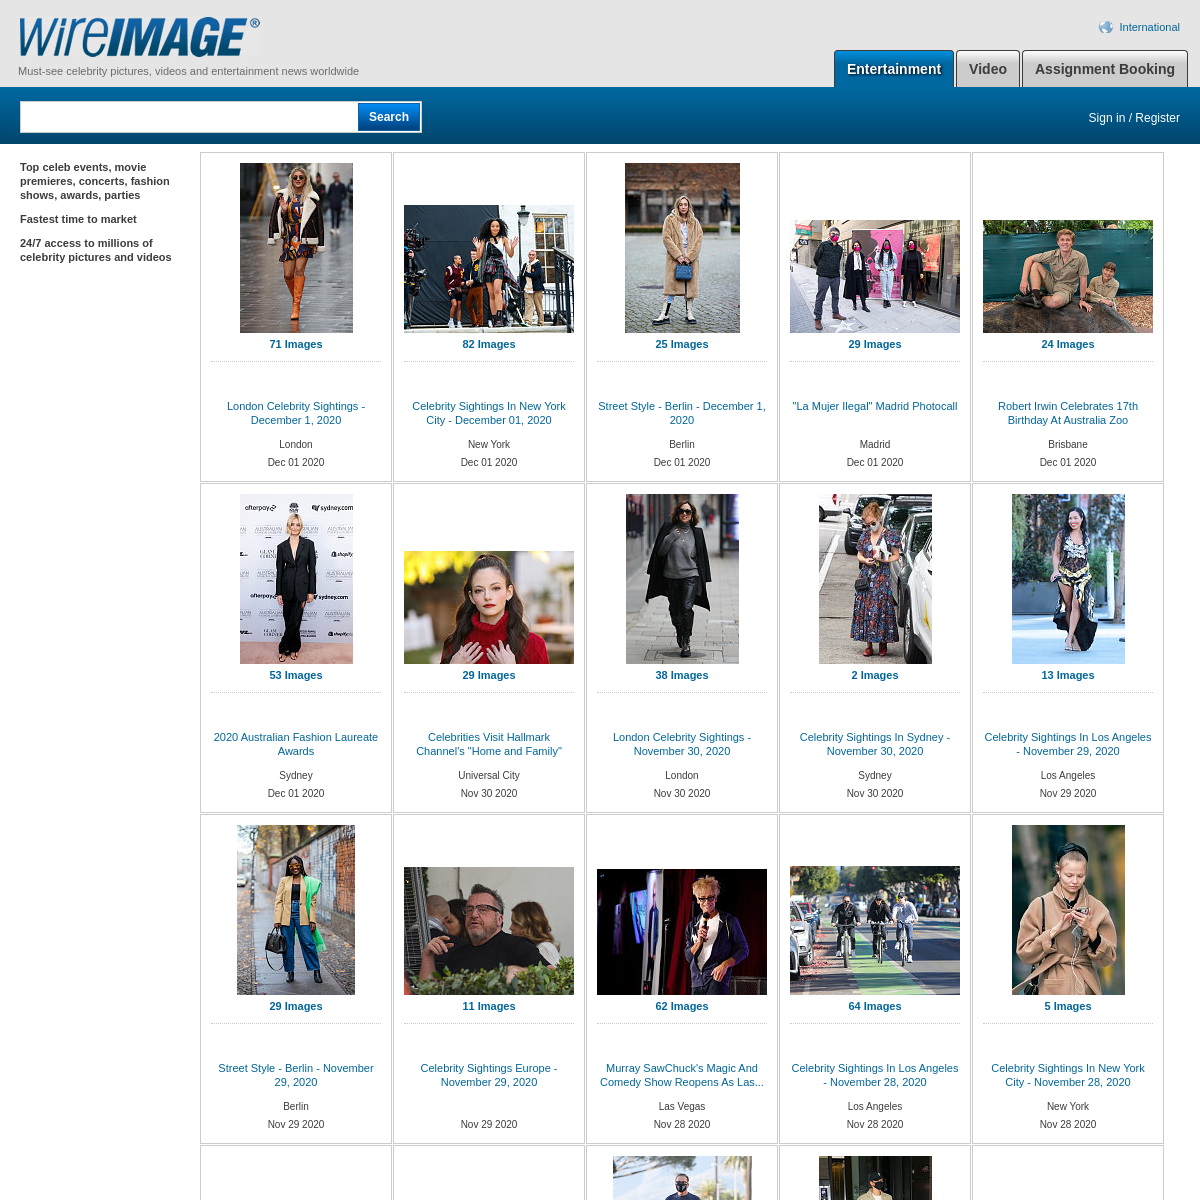 A complete backup of wireimage.com